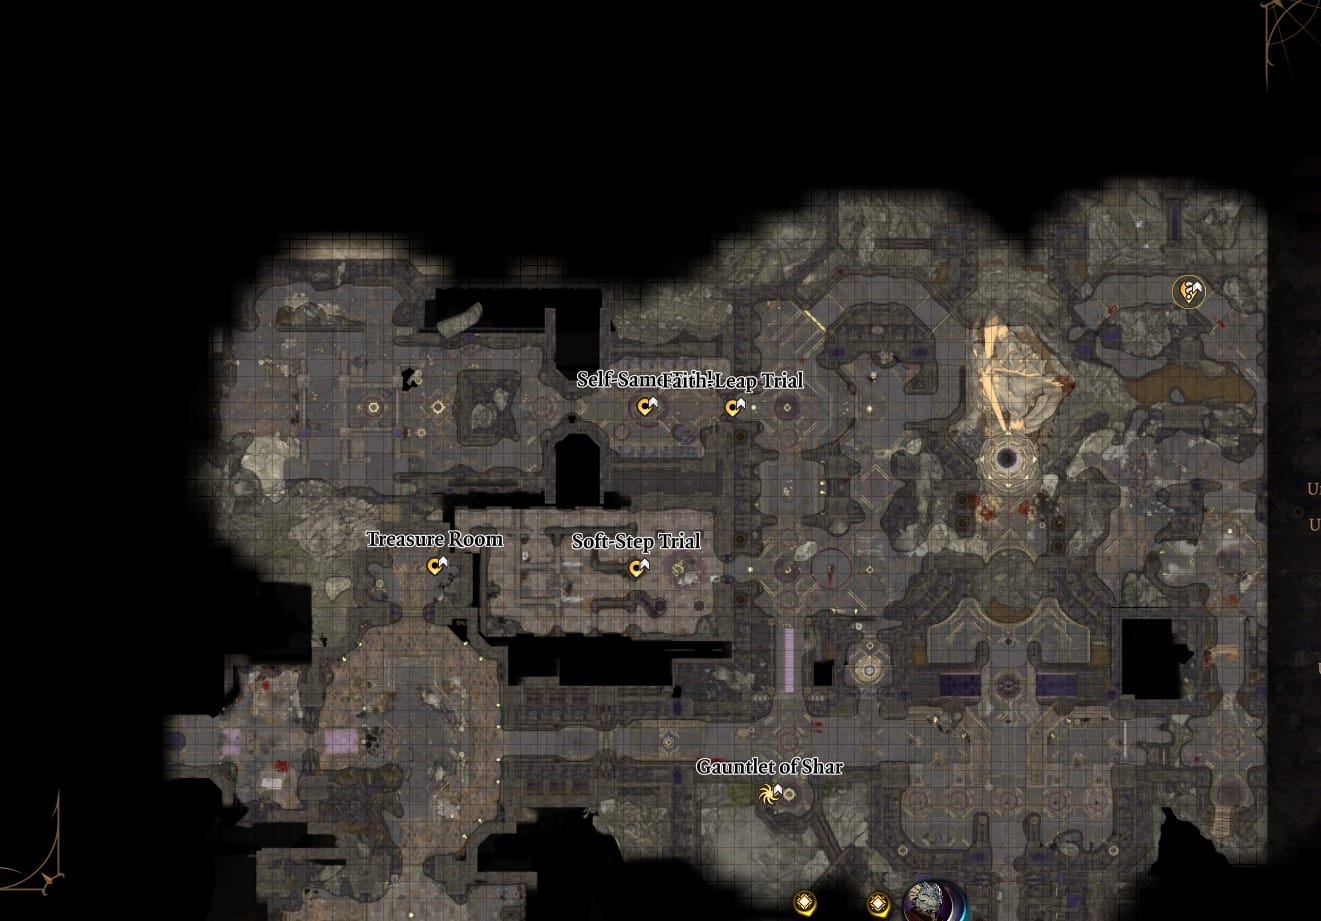 Gauntlet of Shar map screenshot showing the locations of the three trial rooms